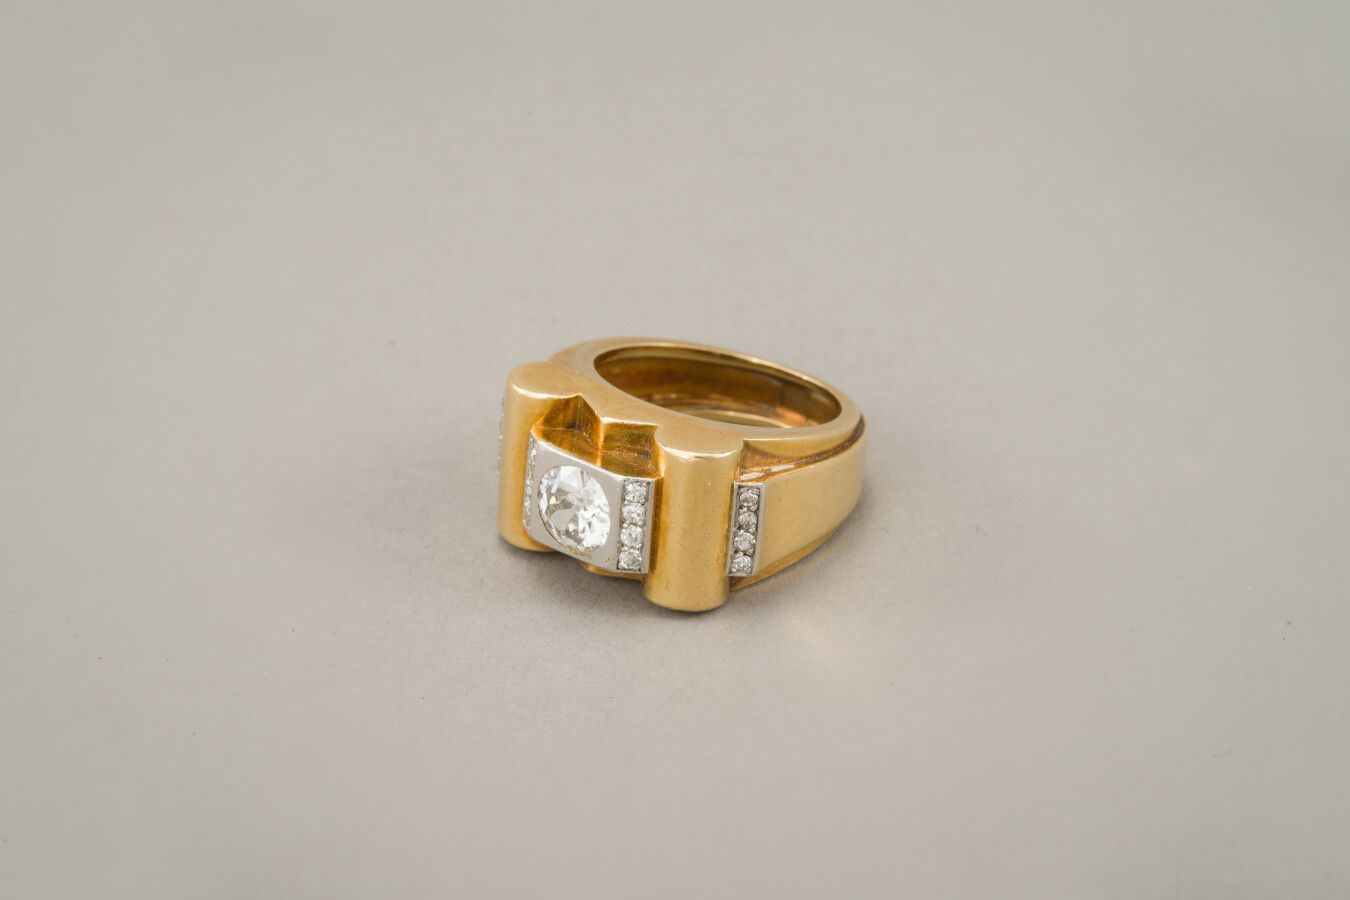 Null 93. An 18-carat yellow gold and platinum tank ring with an old-cut diamond
&hellip;